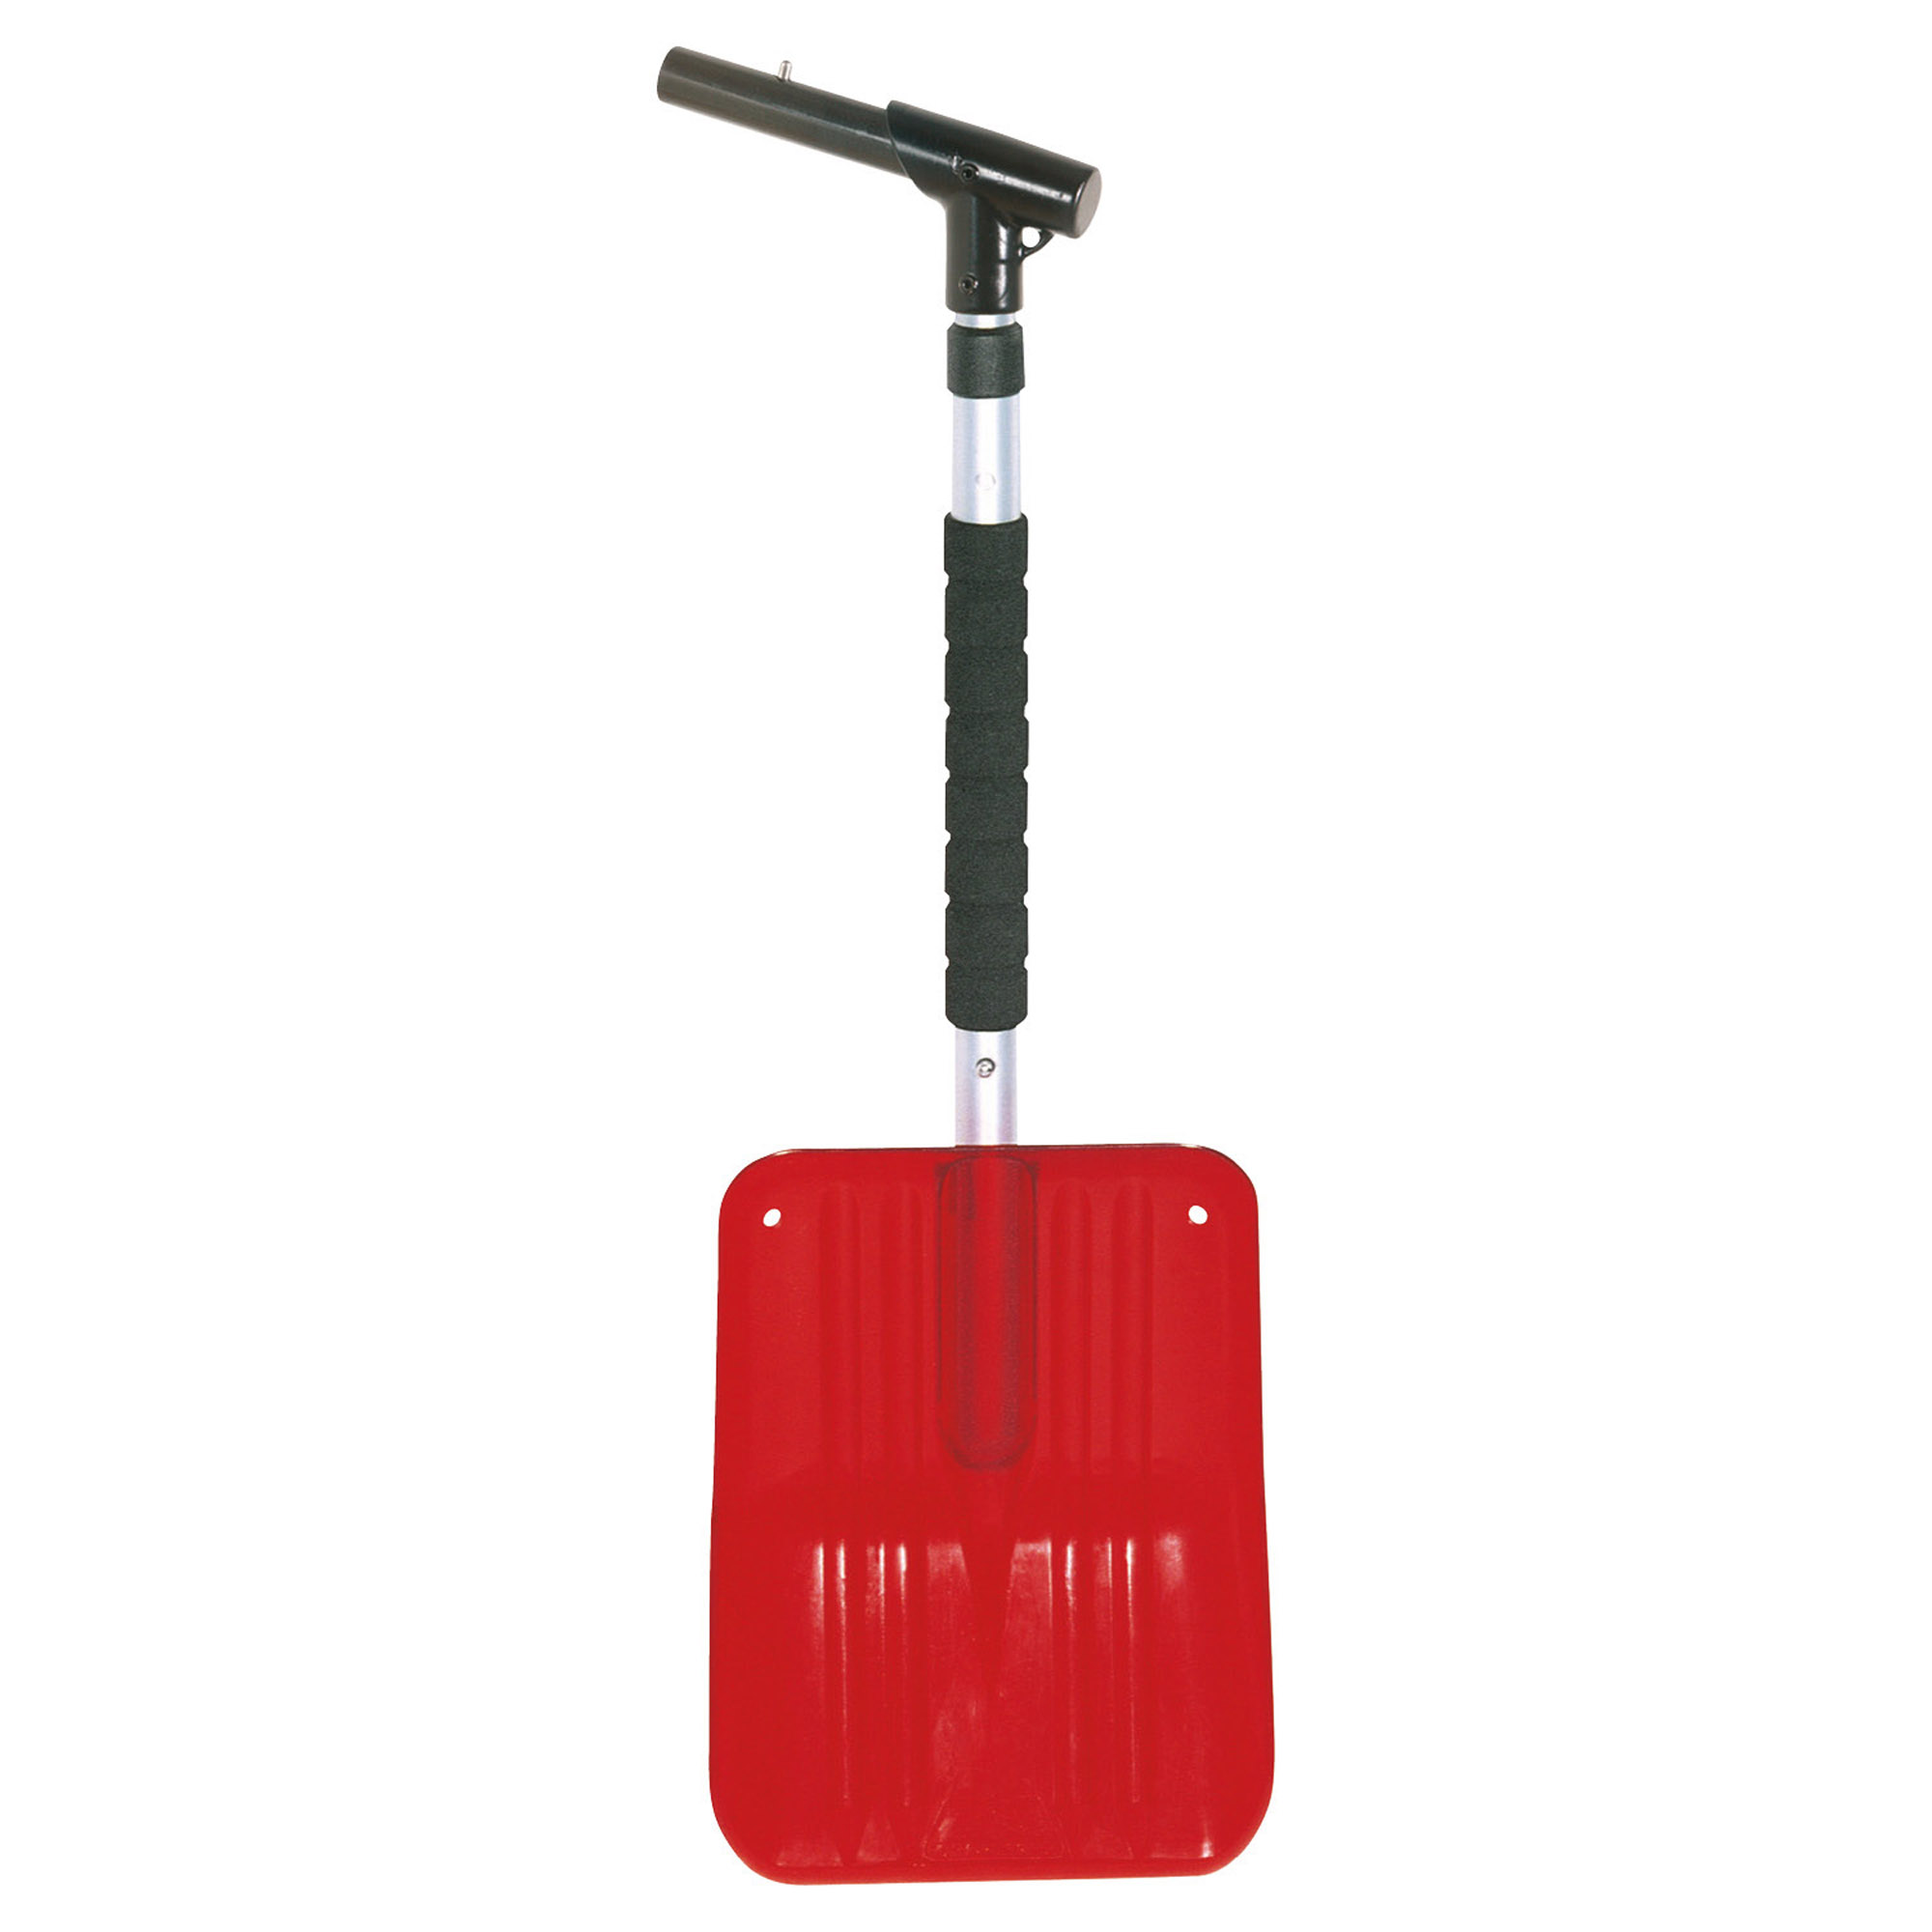 Avalanche Shovel Expedition red